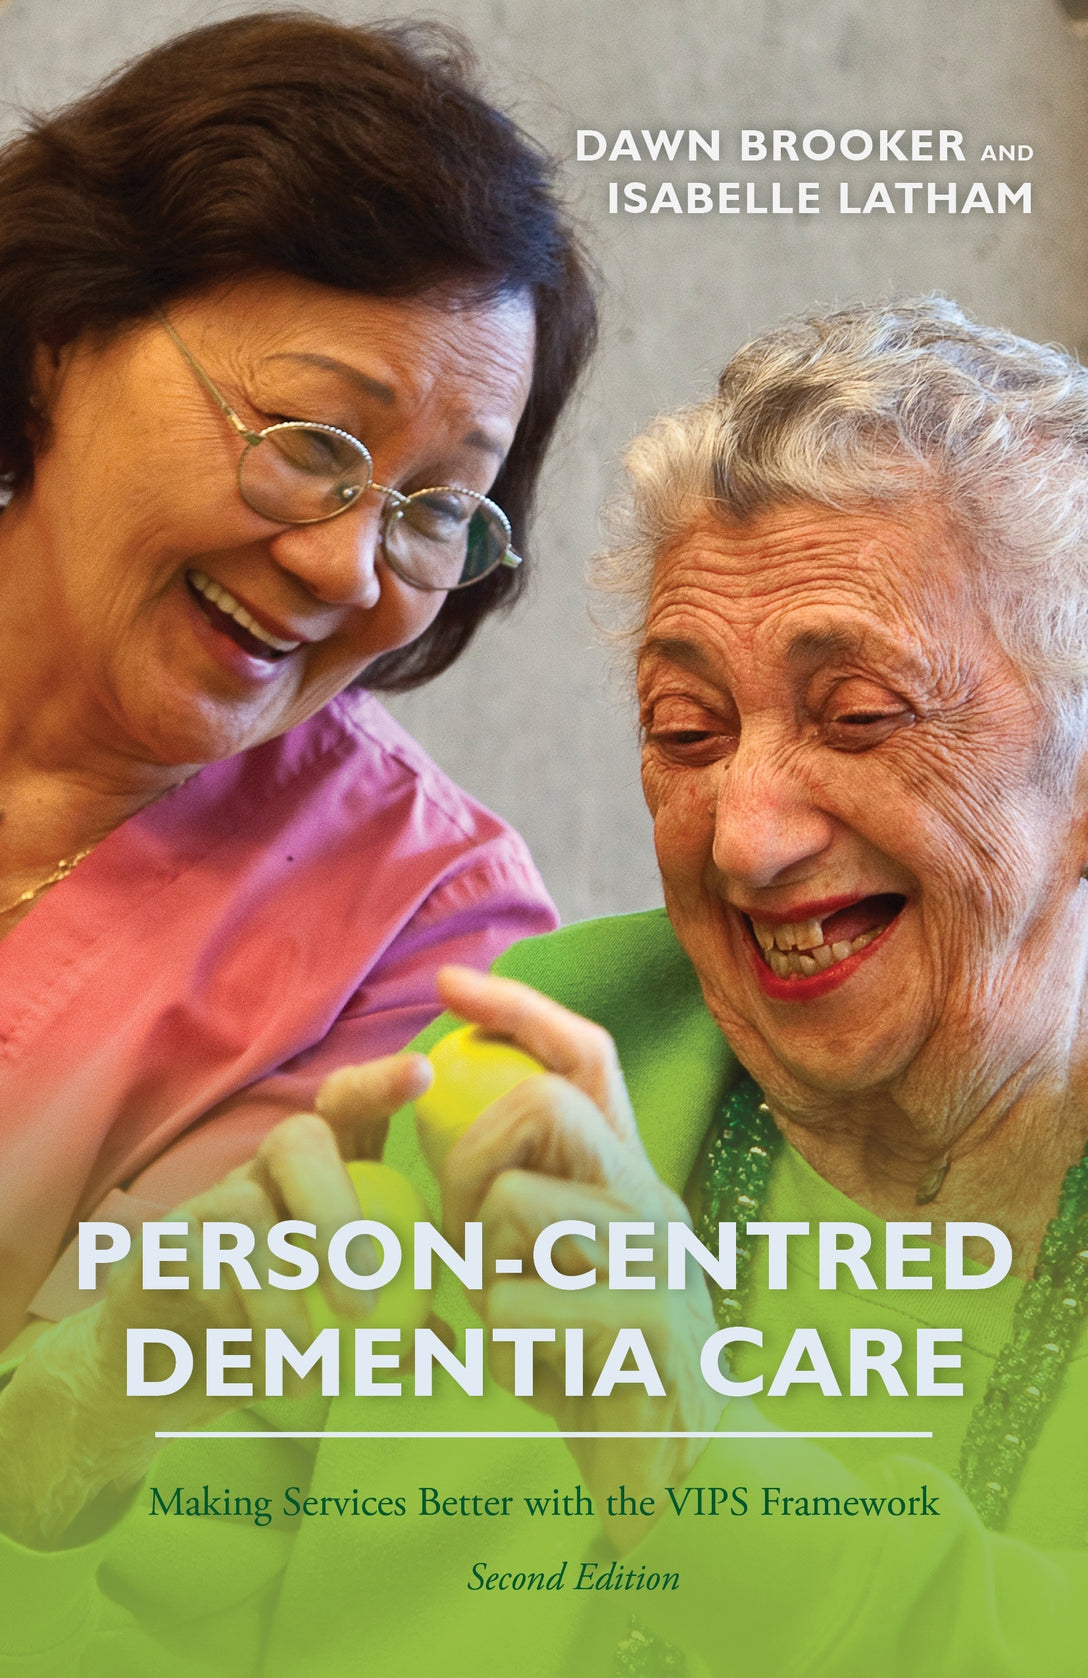 Person-Centred Dementia Care, Second Edition by Dawn Brooker, Isabelle Latham